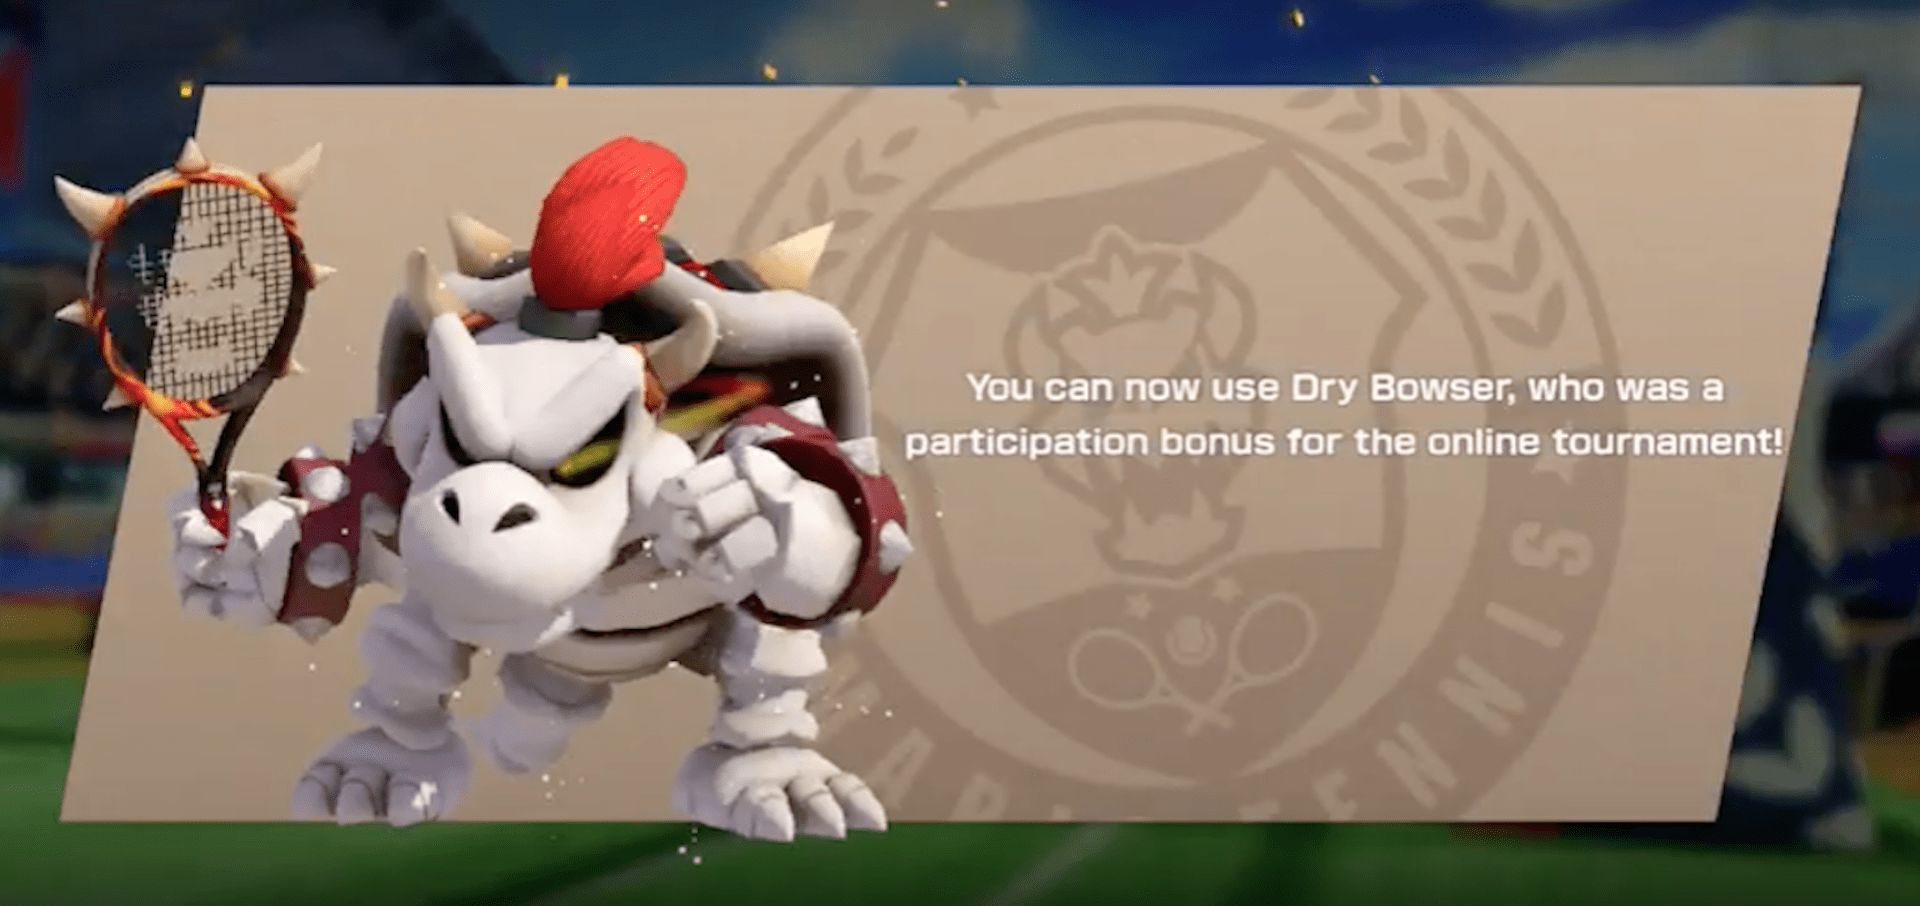 It’s A Service Ace! Dry Bowser Comes to Mario Tennis Aces in July This Year